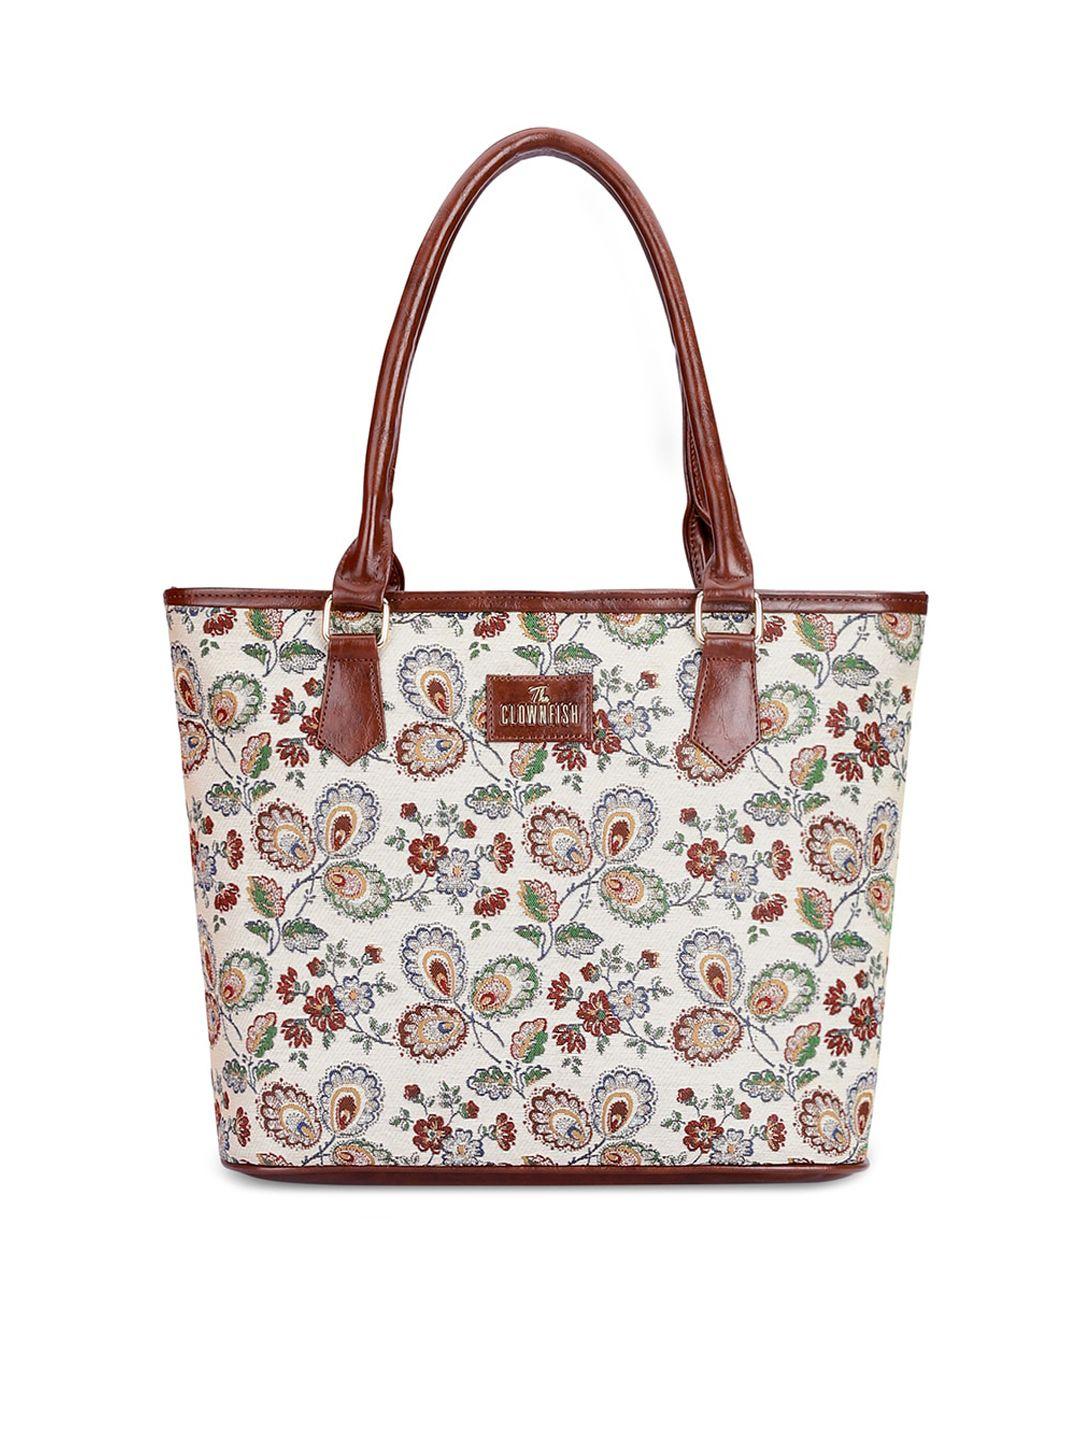 the clownfish floral printed structured tote bag